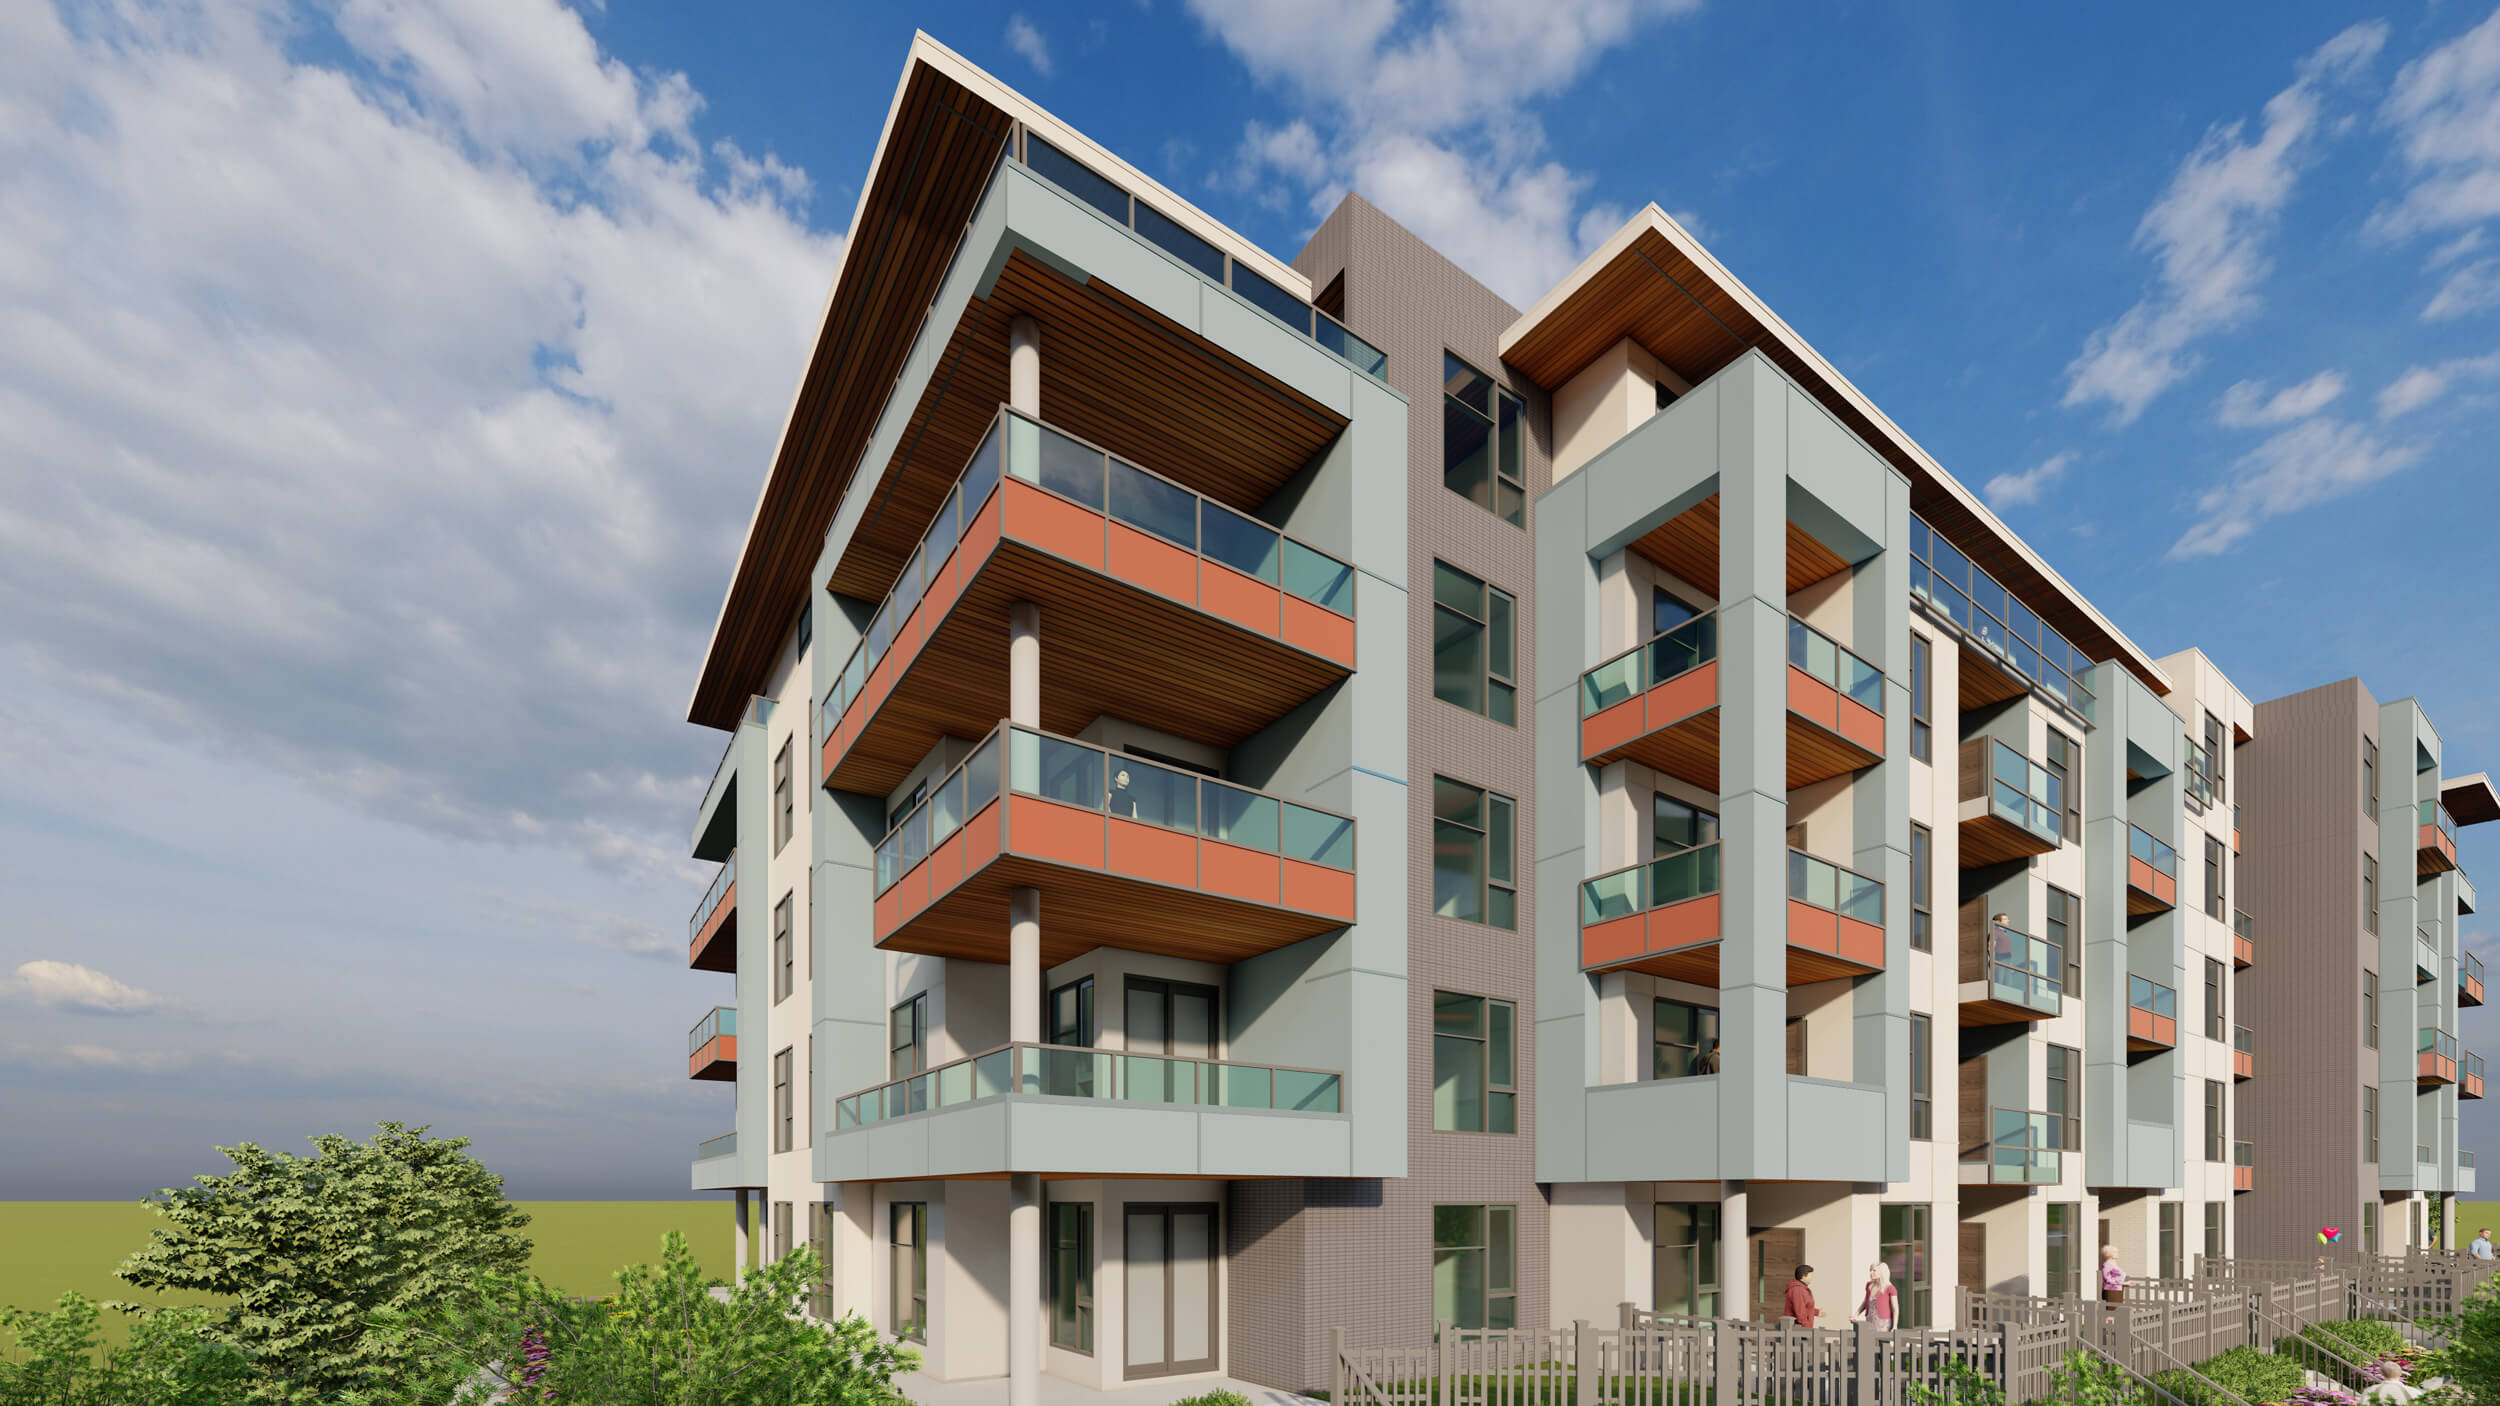 The “Fraser Hwy” development is a 4-storey residential condo project in Surrey. Design by Group 161 | DF Architecture.